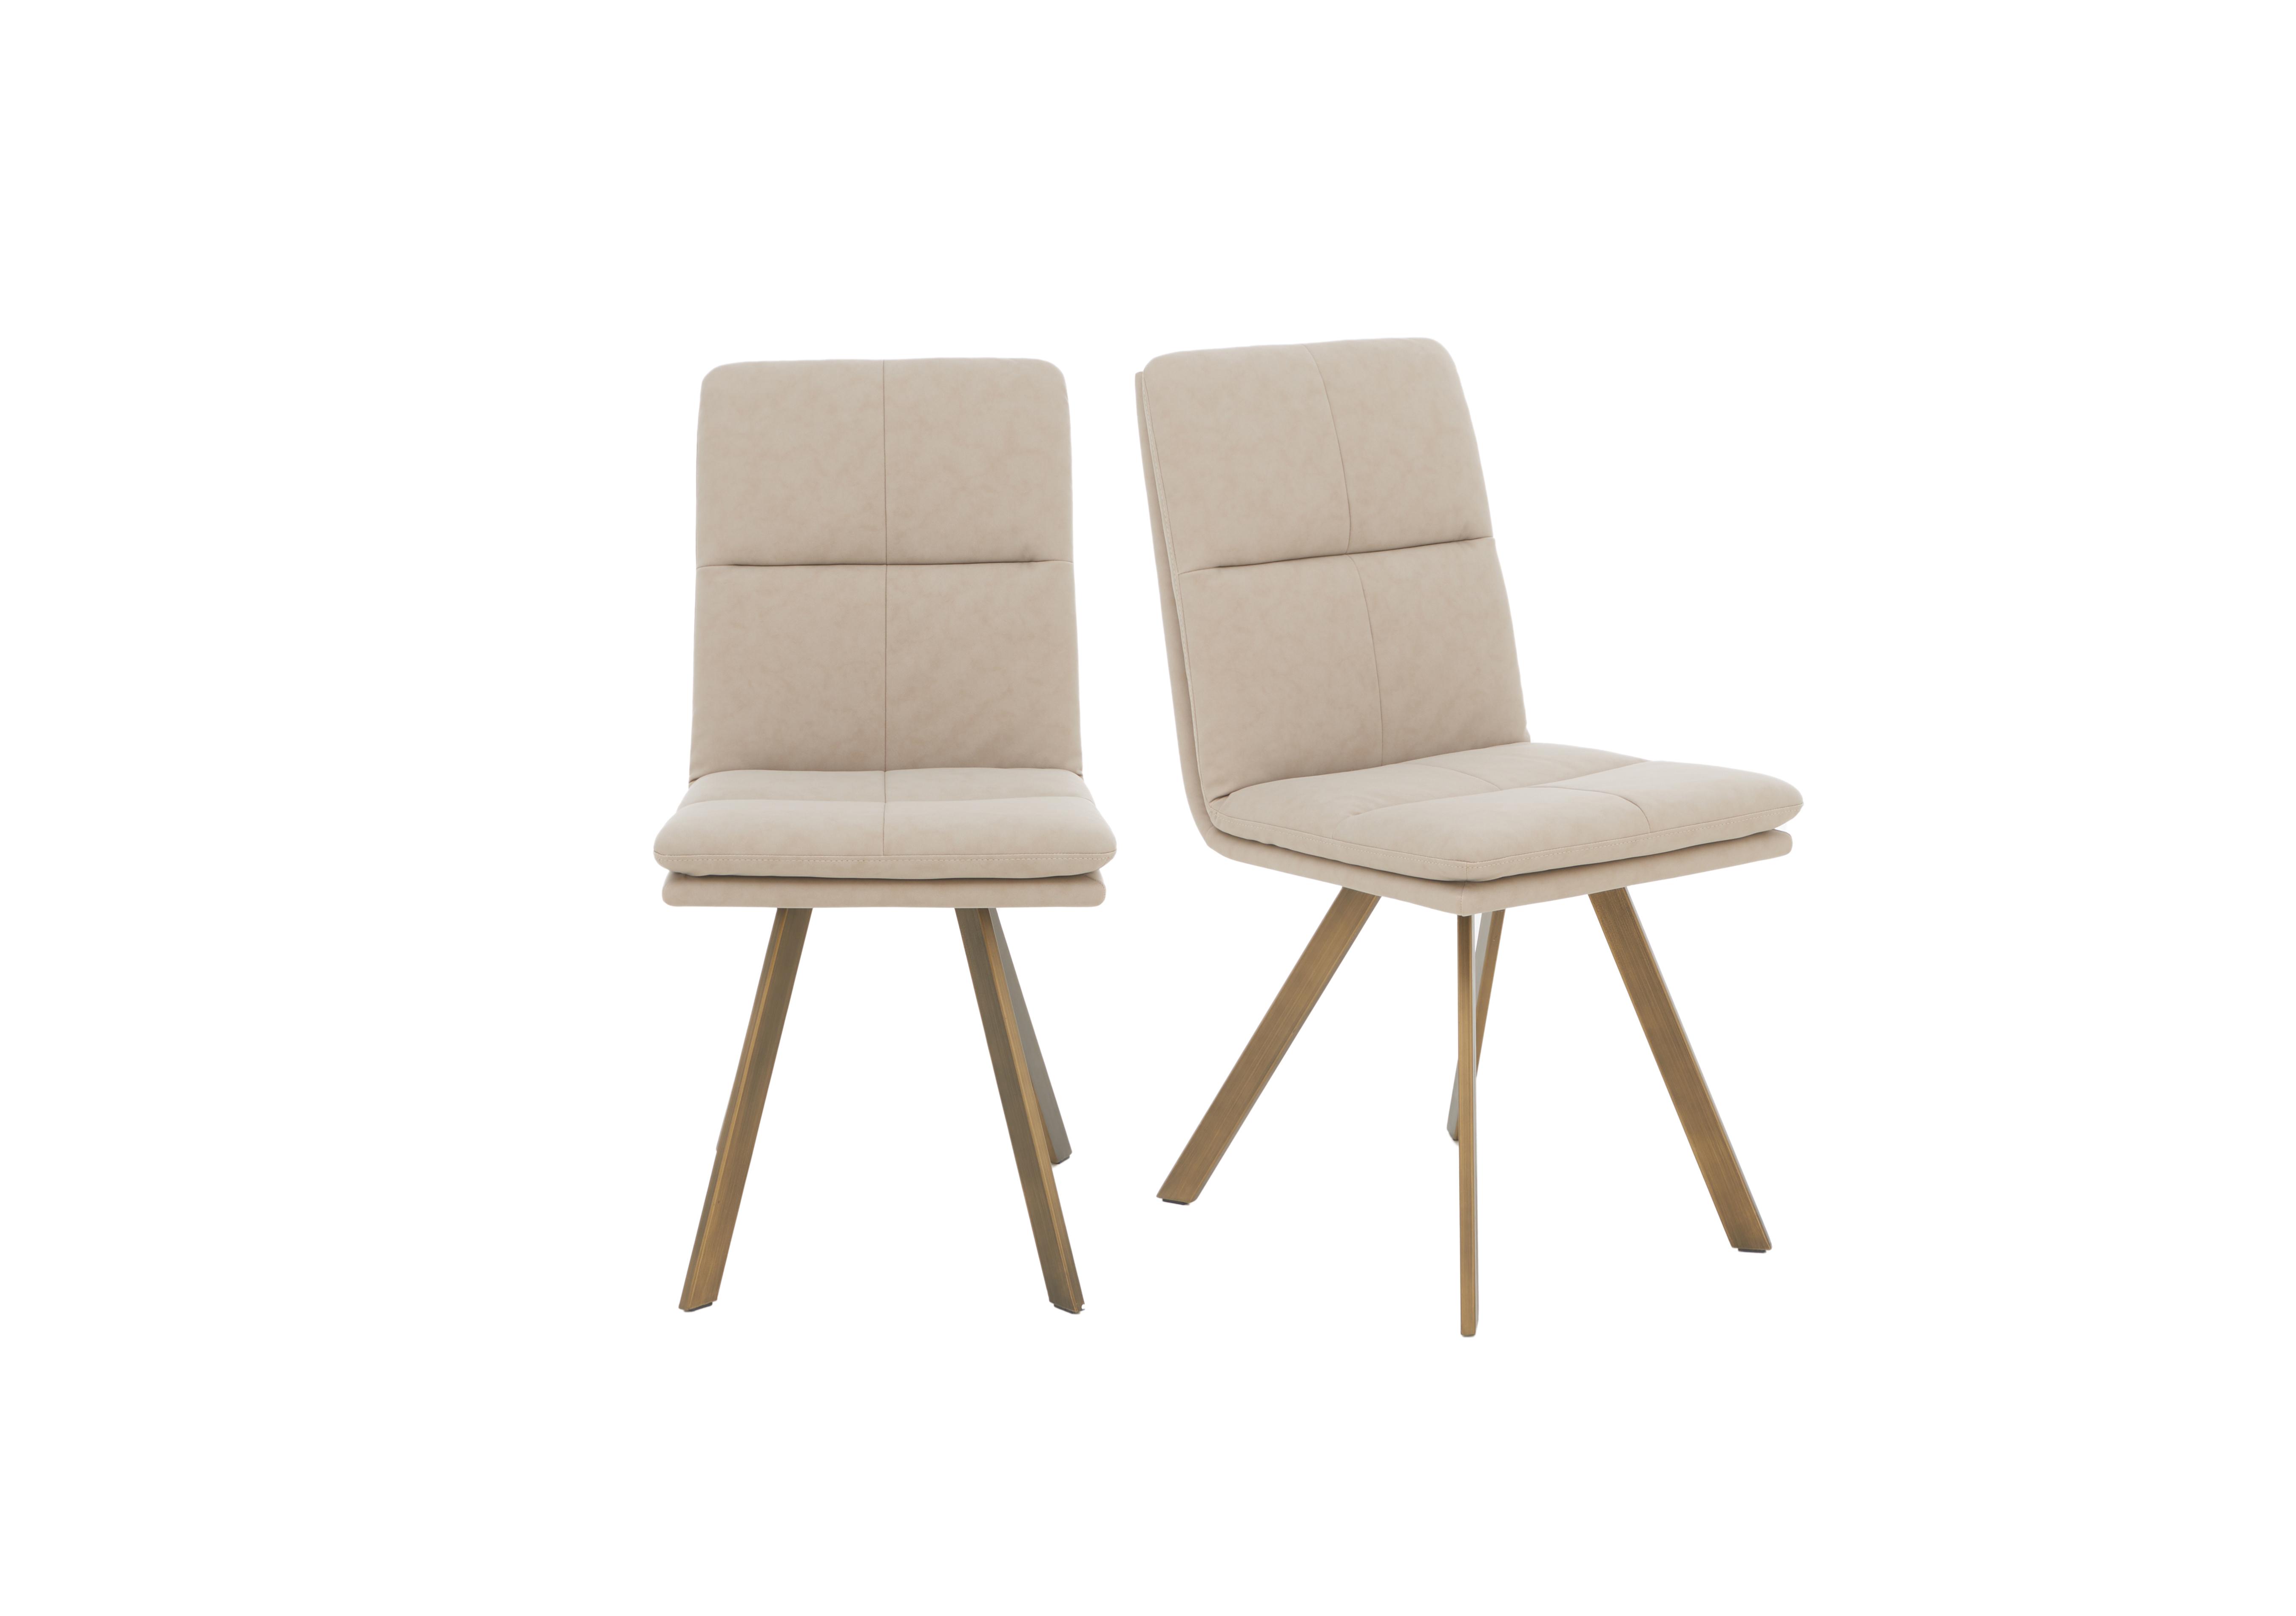 Veyron Pair of Dining Chairs in Taupe on Furniture Village